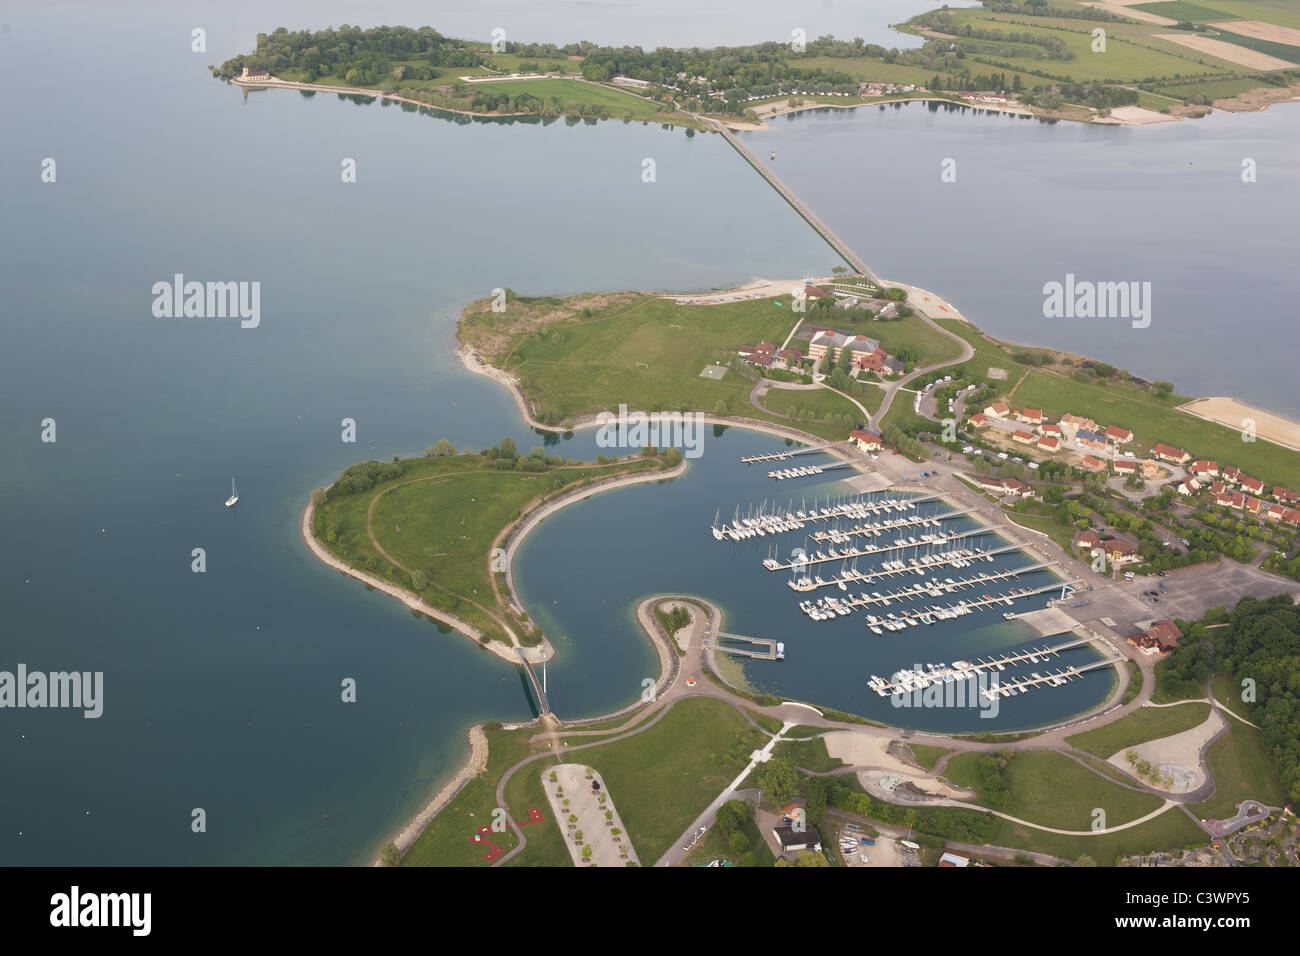 AERIAL VIEW. Reservoir built to regulate the flow of the Marne River. Lac du Der Marina in the Champagne-Ardenne region, Grand Est, France. Stock Photo